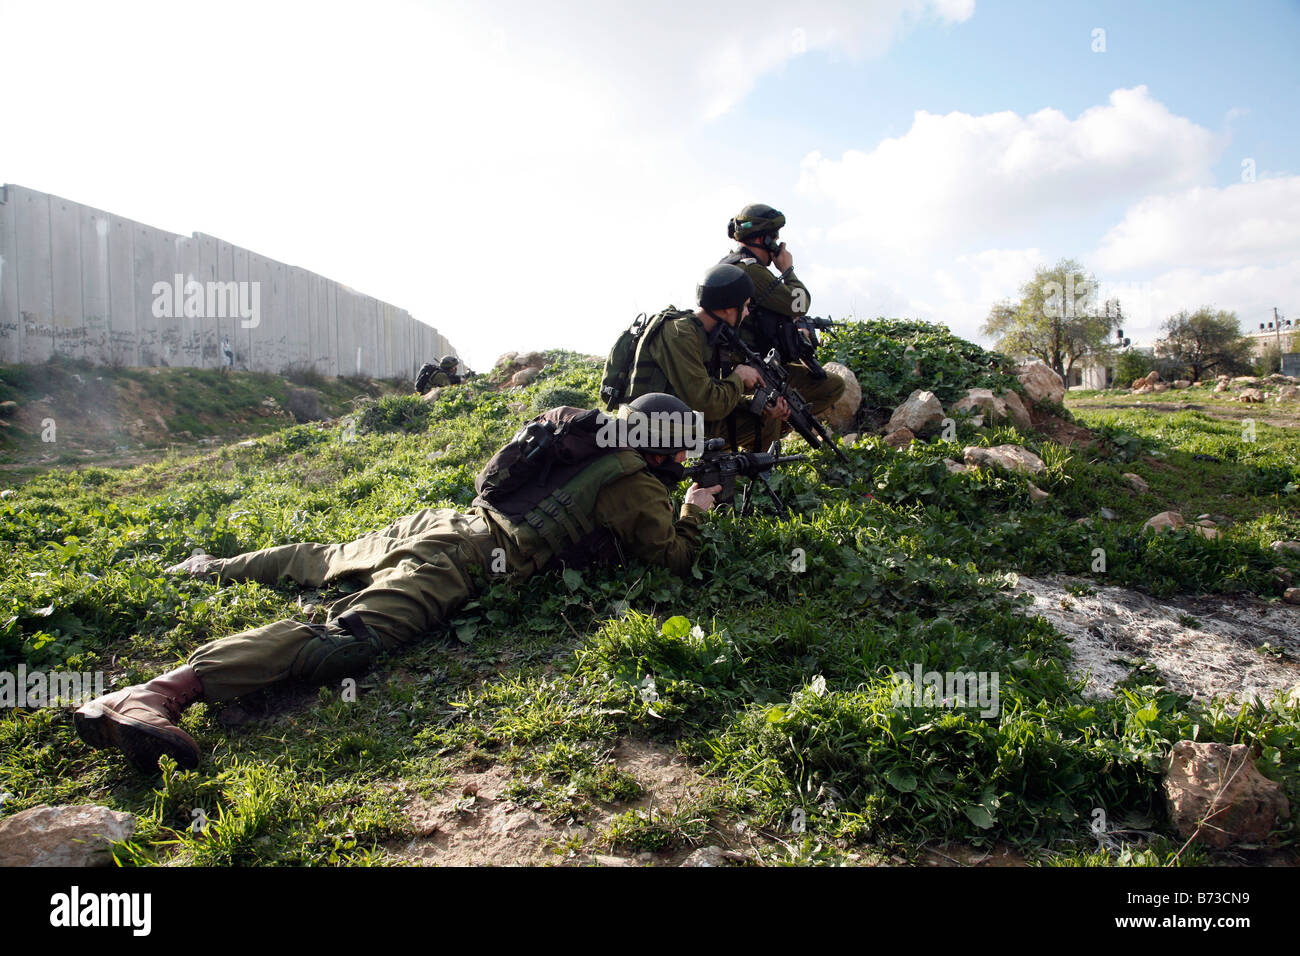 Israeli soldiers shooting rubber bullets at Palestinian stone throwers near the separation barrier in the West Bank. Stock Photo